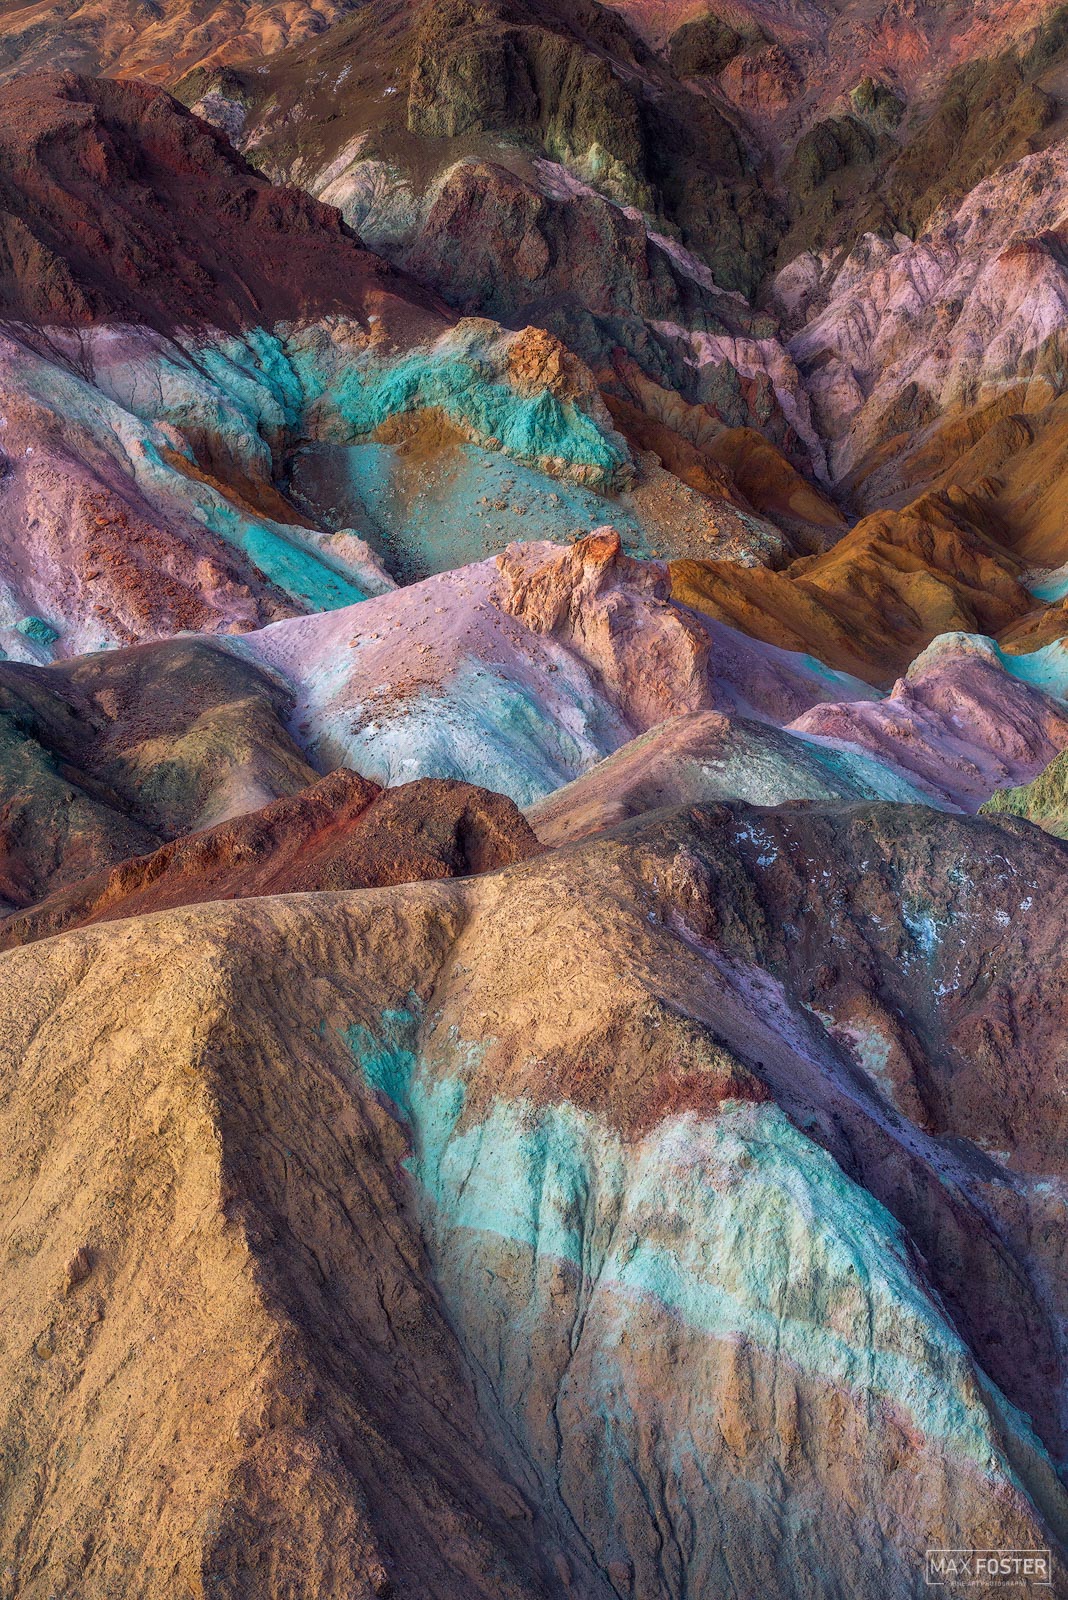 Elevate your space with Pastel Palette, Max Foster's limited edition photography print of Artists Palette in Death Valley from...